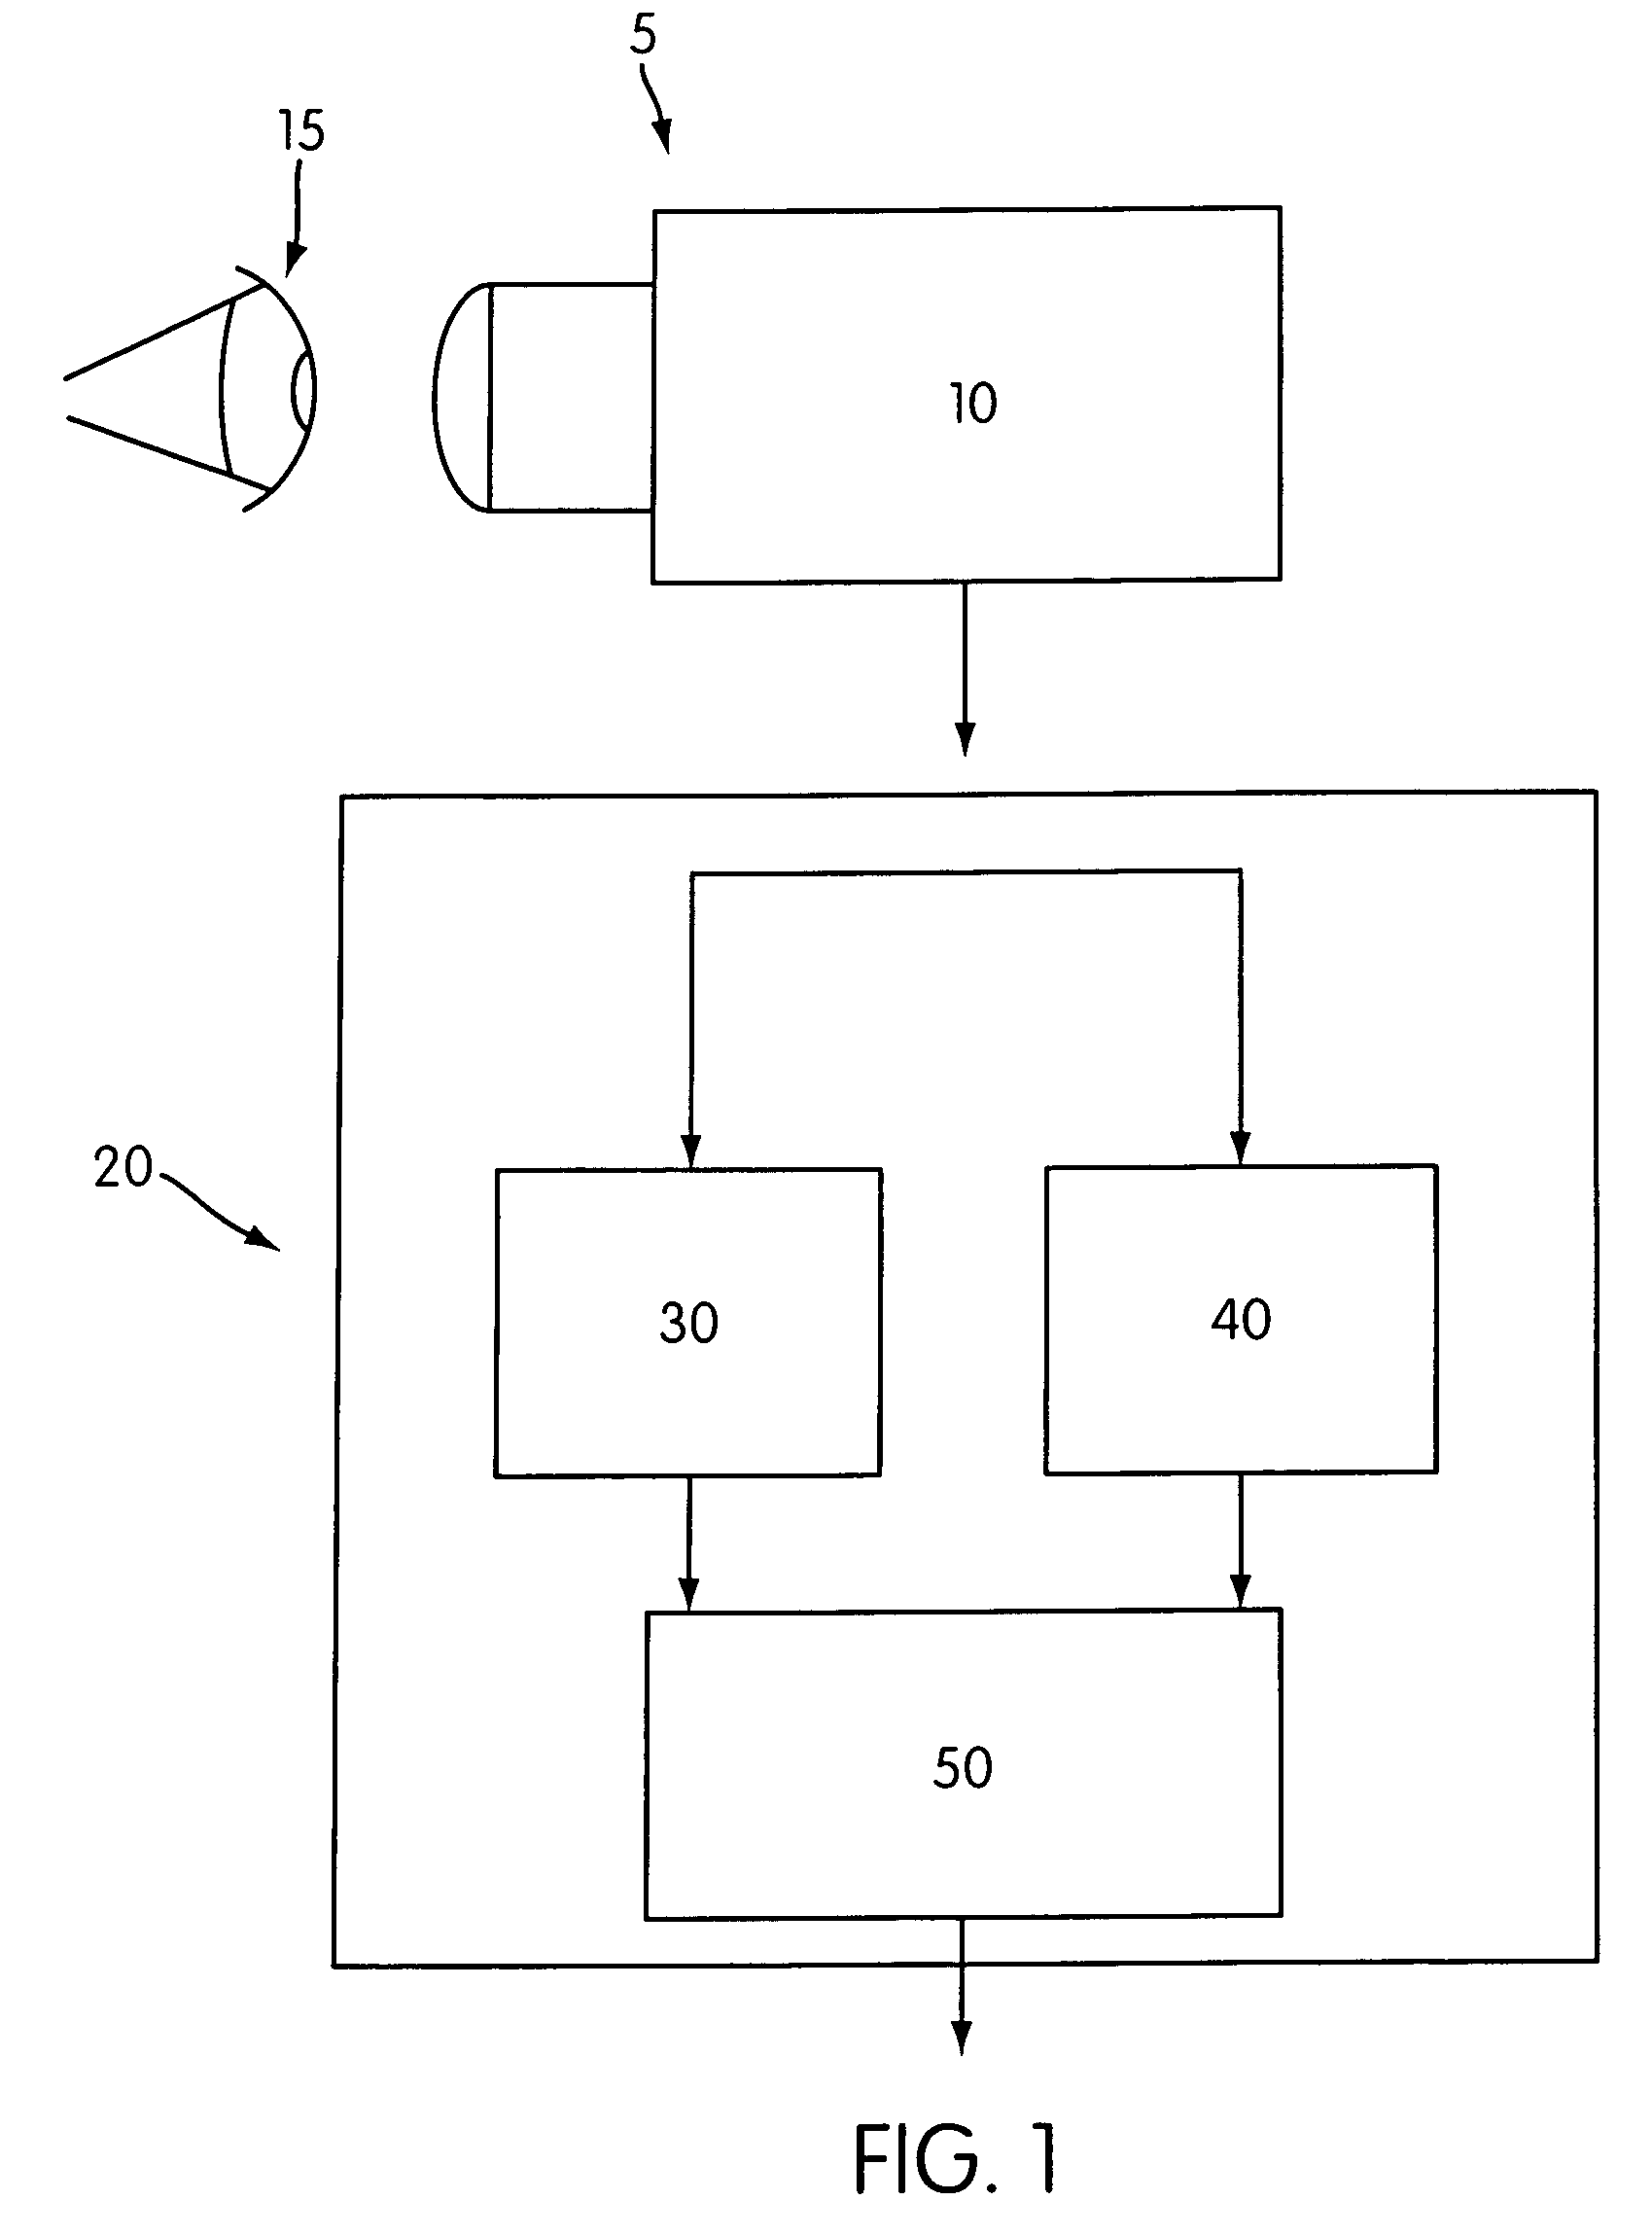 Method and apparatus for testing sleepiness